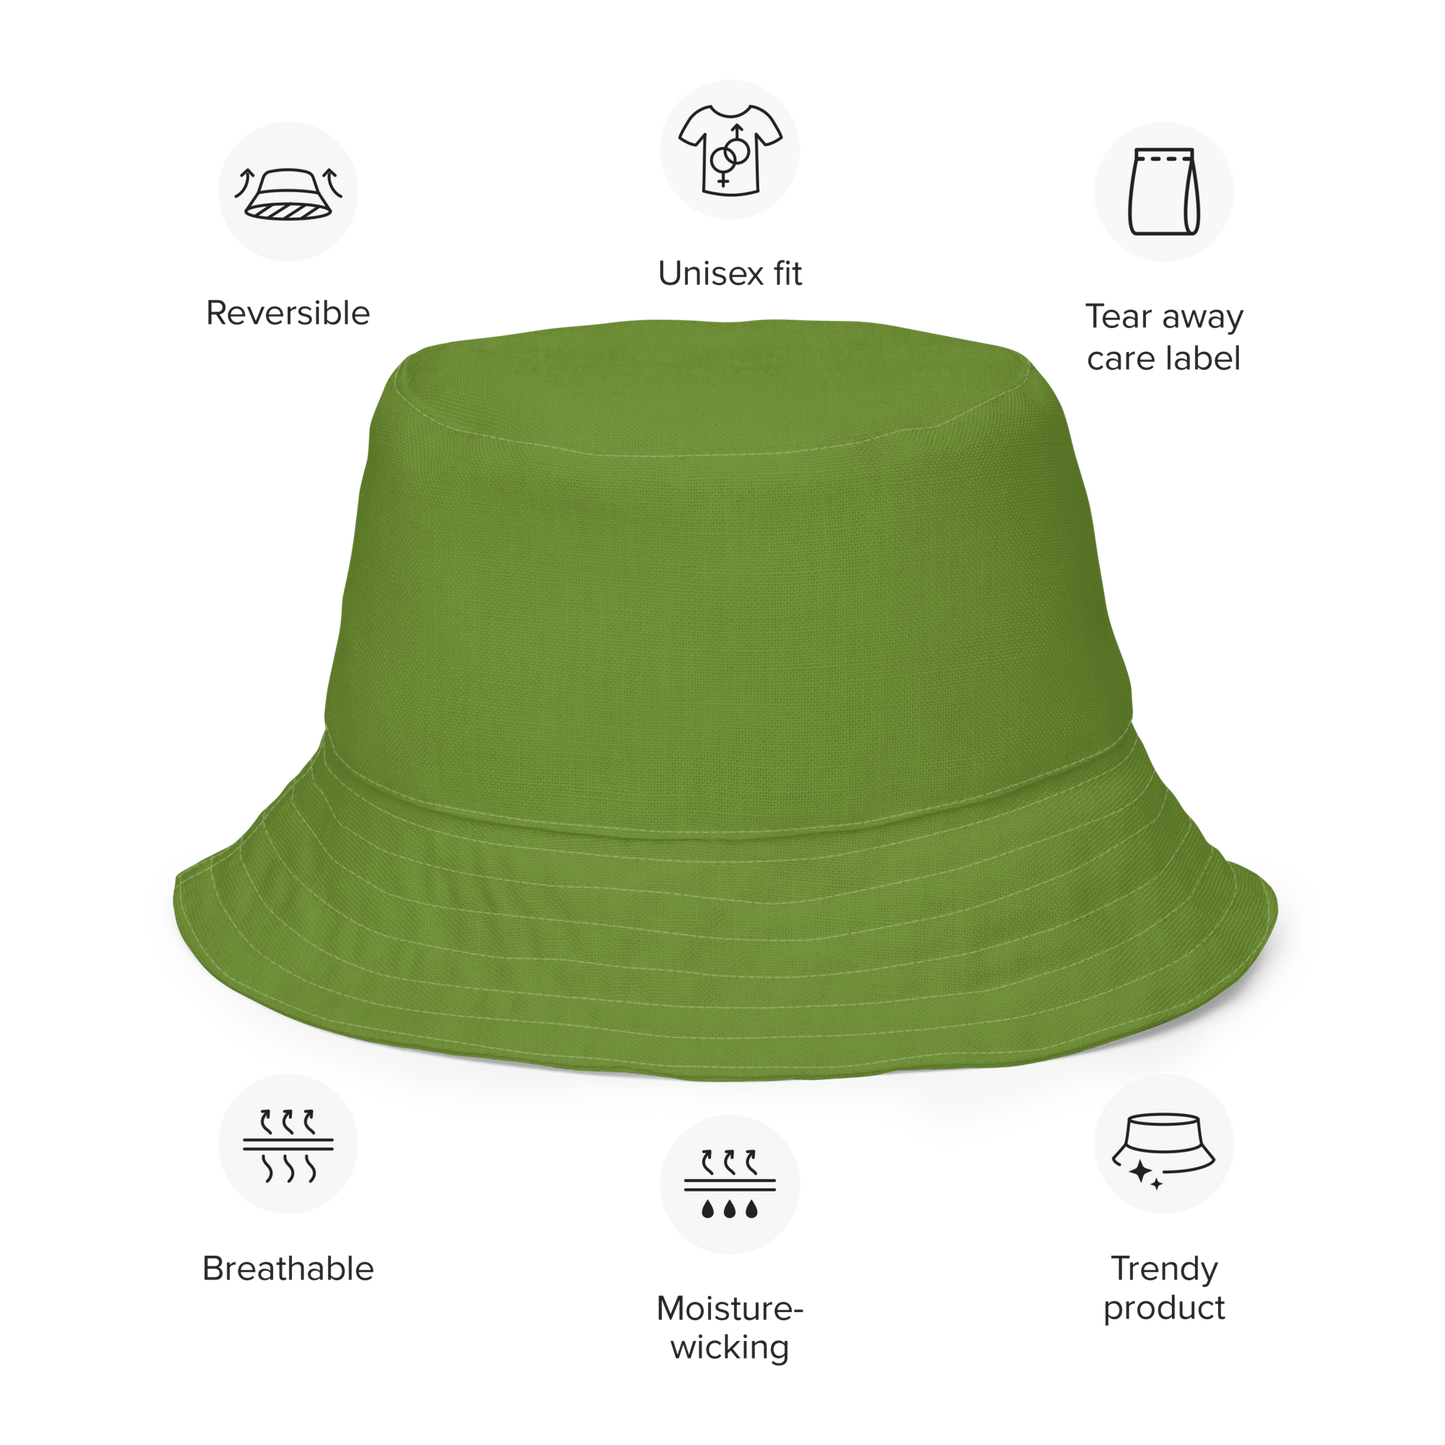 The FLOWER LOVE Collection - "Butterfly on a Bloom" Design Premium Reversible Bucket Hat - Green Inside - Beach Hat, Gifts for Her